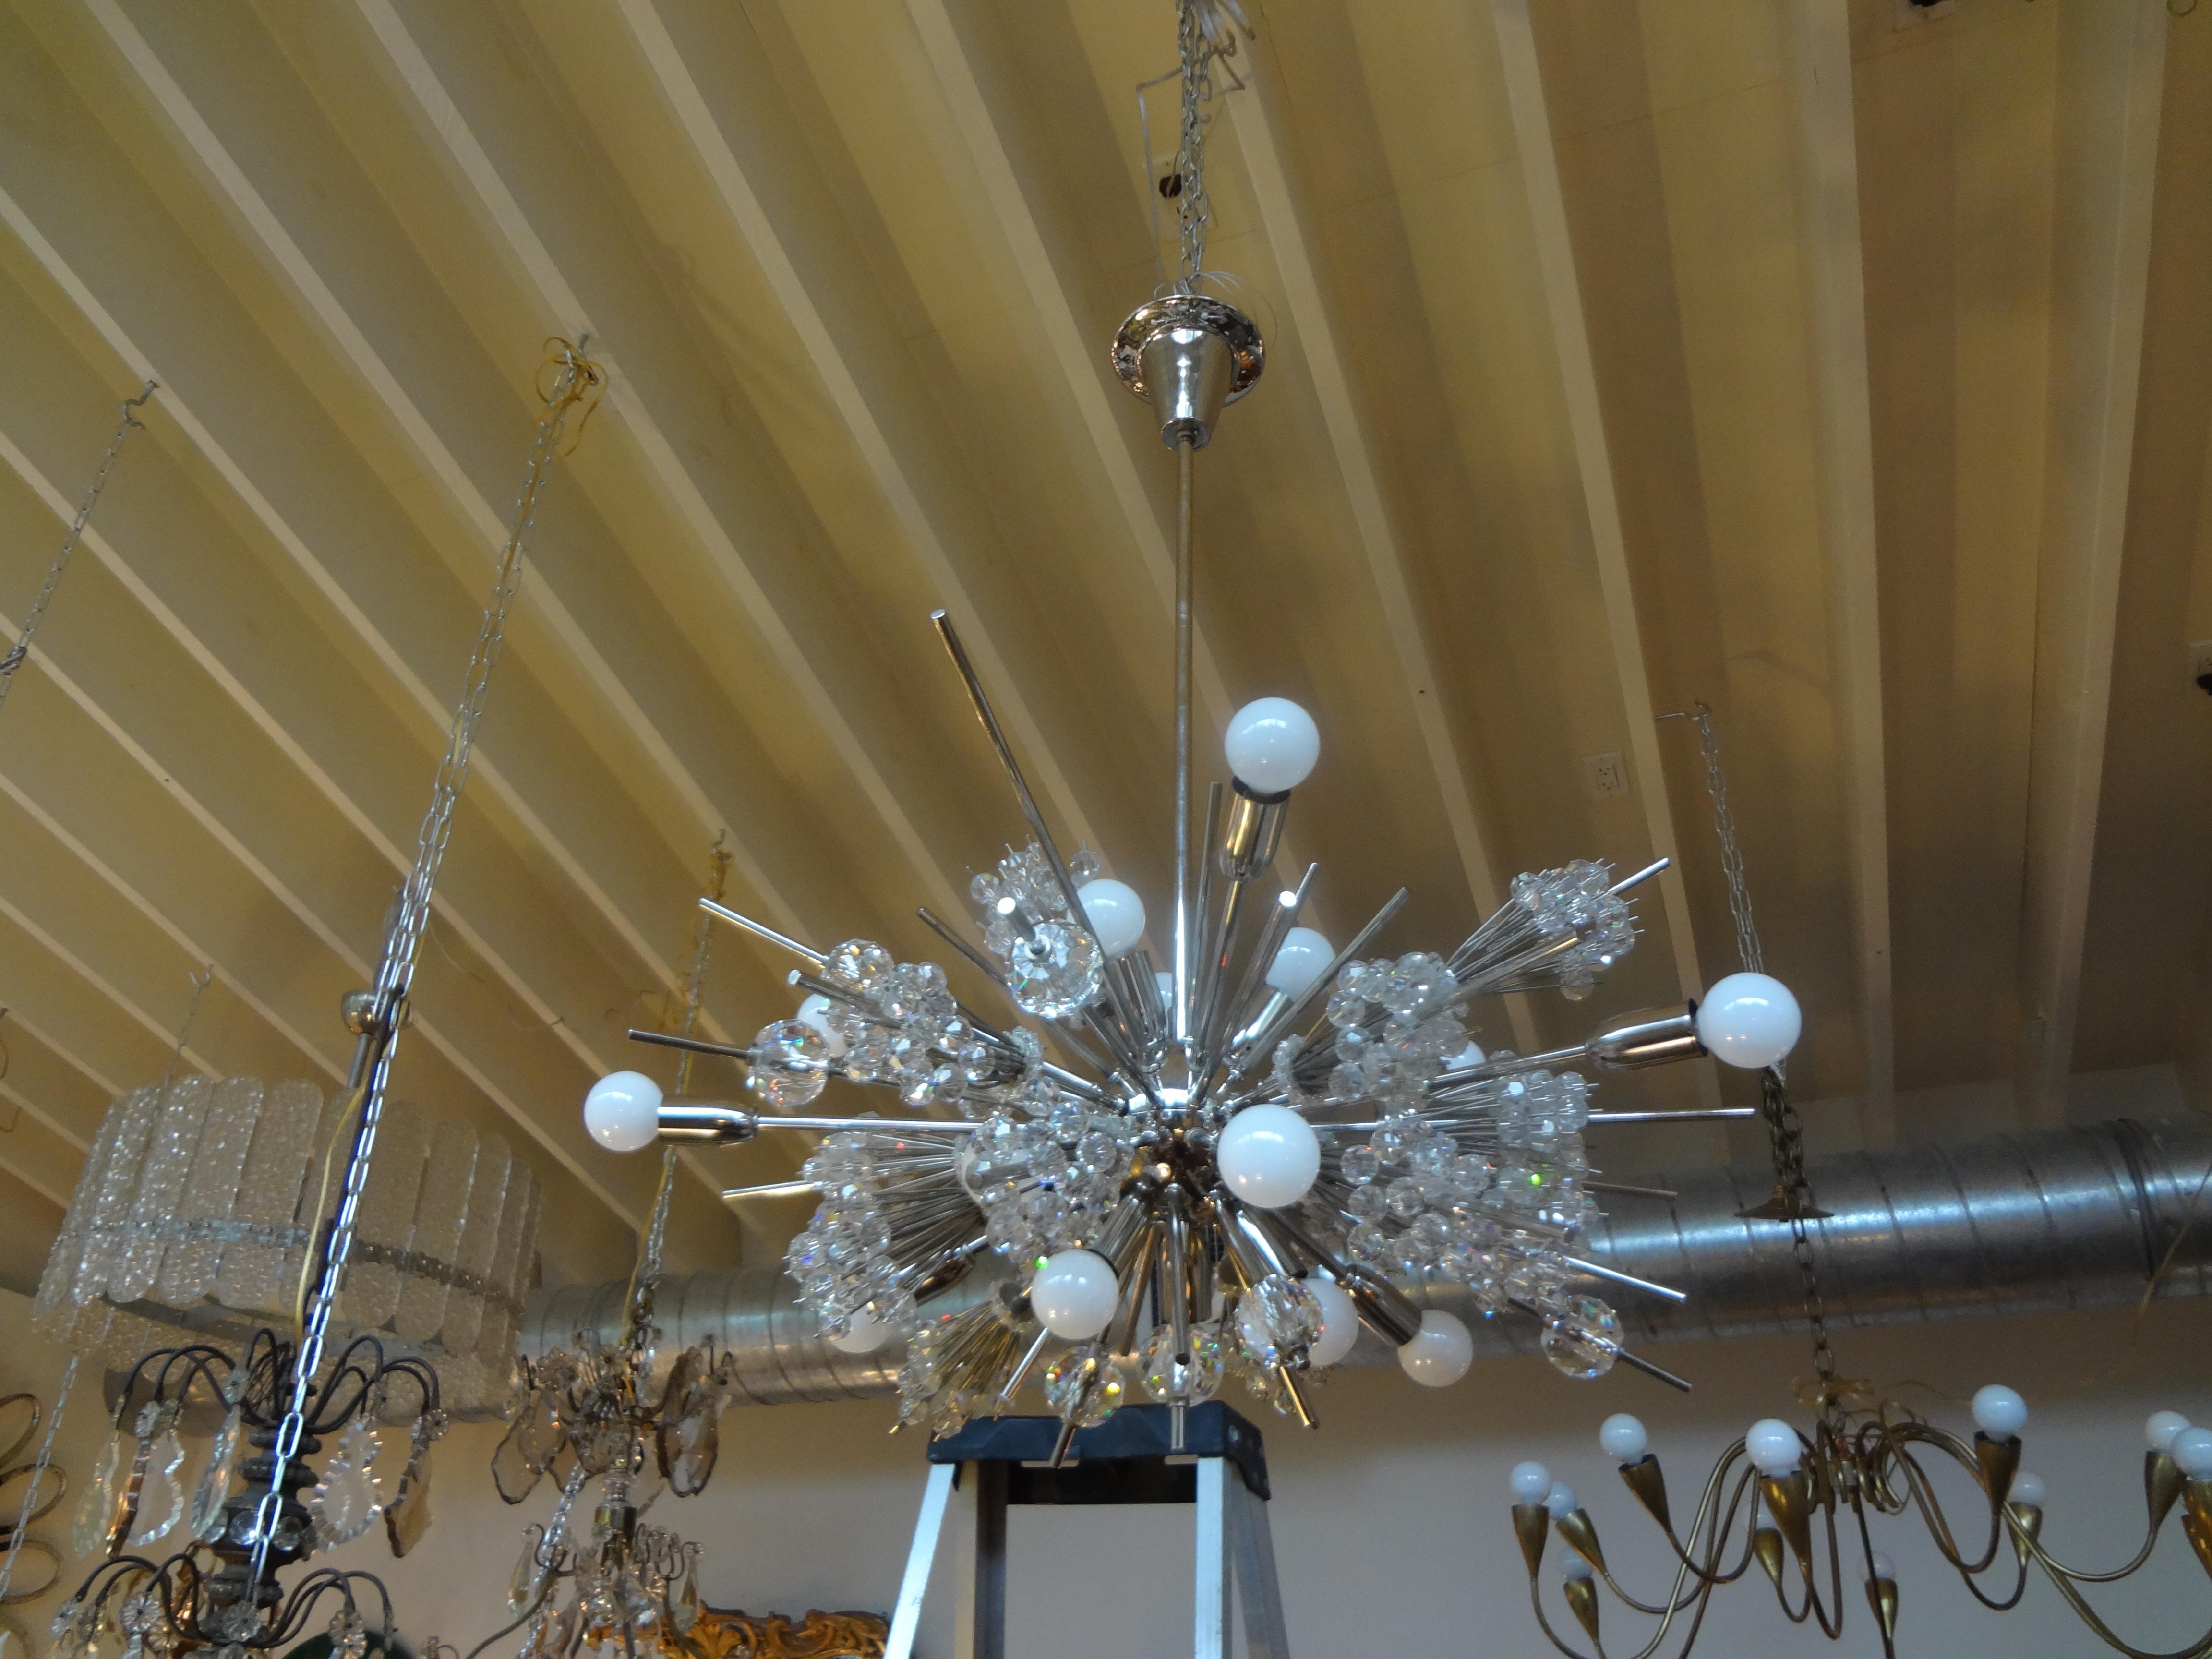 Mid-Century Modern Lobmeyr Metropolitan Opera exploding star chandelier, circa 1960s. This stunning iconic chandelier creates the effect of a starburst in handcut Austrian crystals. This Sputnik chrome and glass chandelier was designed in the 1960s